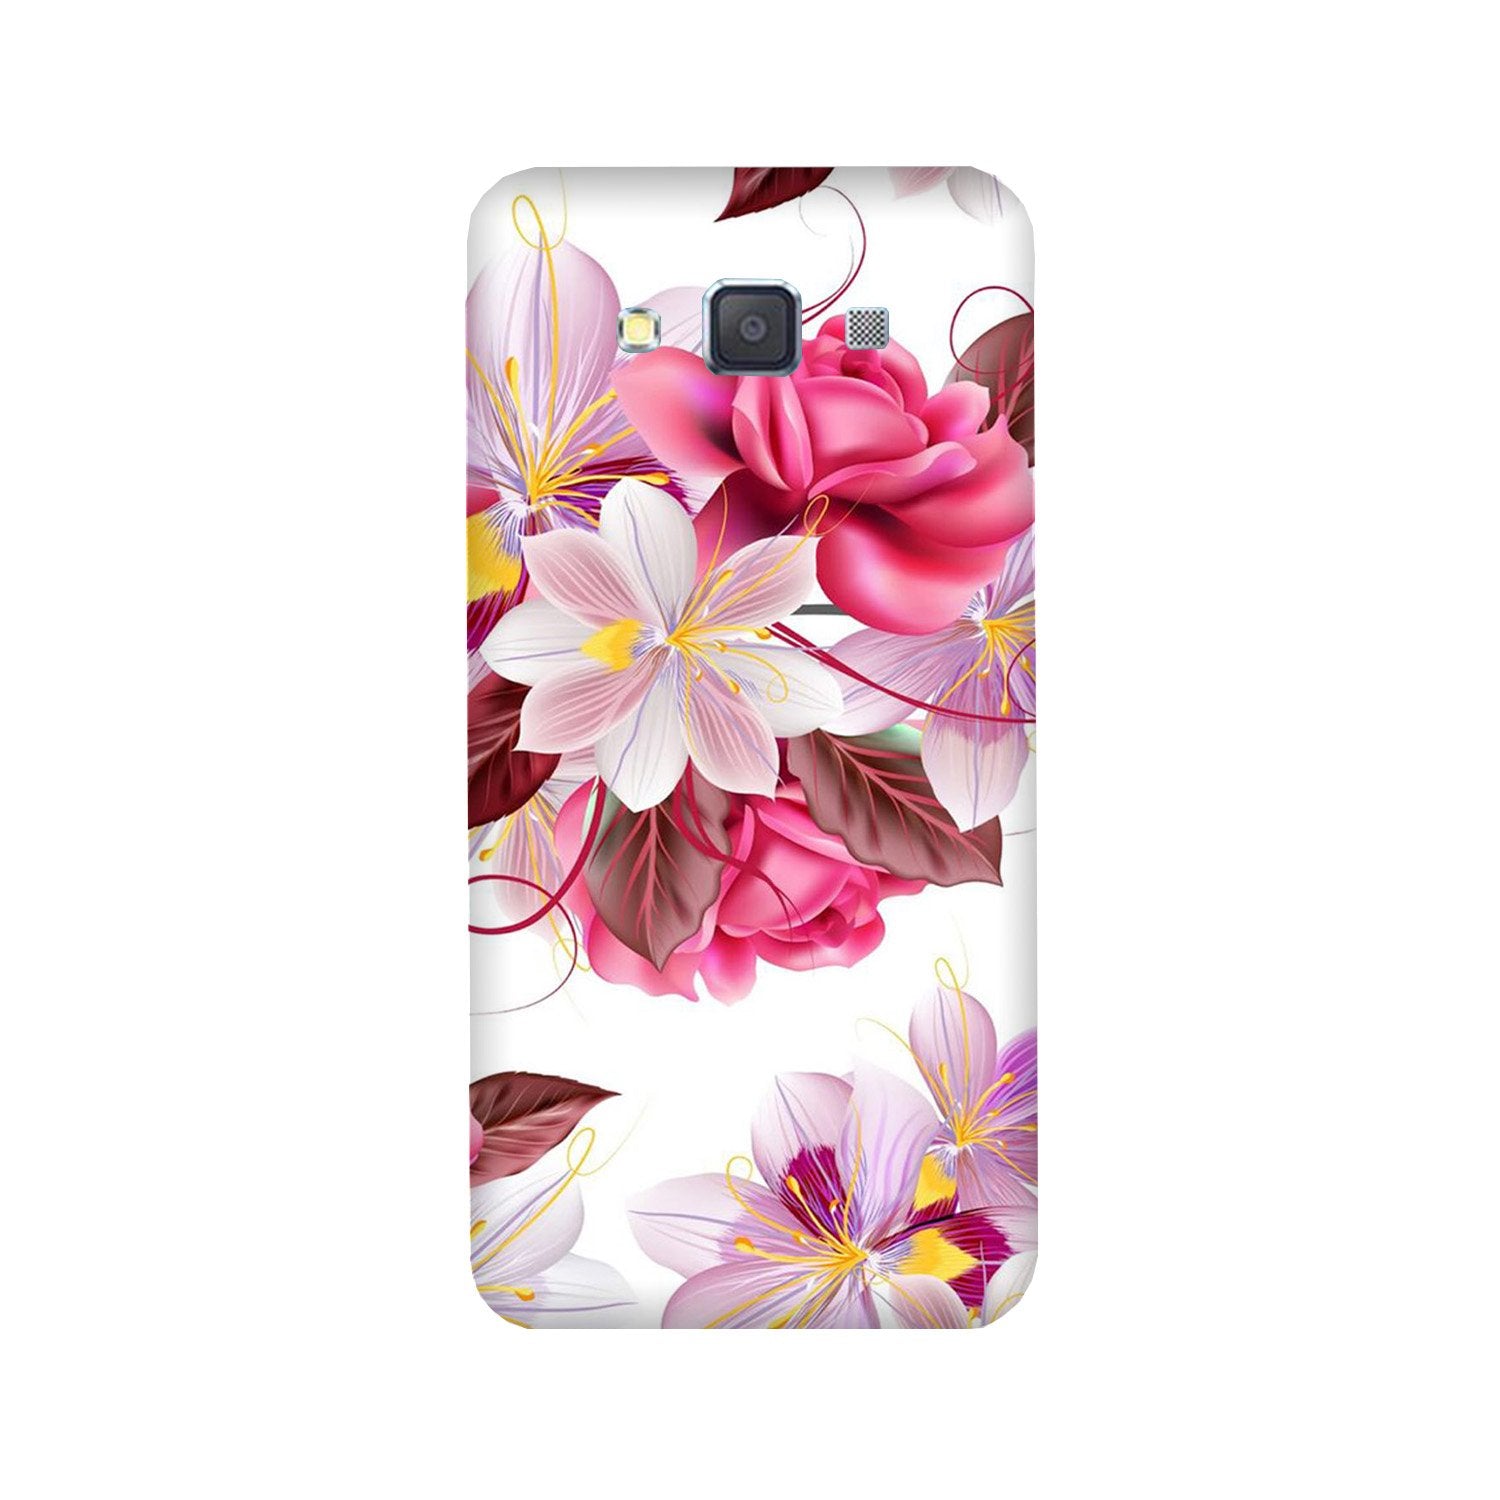 Beautiful flowers Case for Galaxy ON7/ON7 Pro